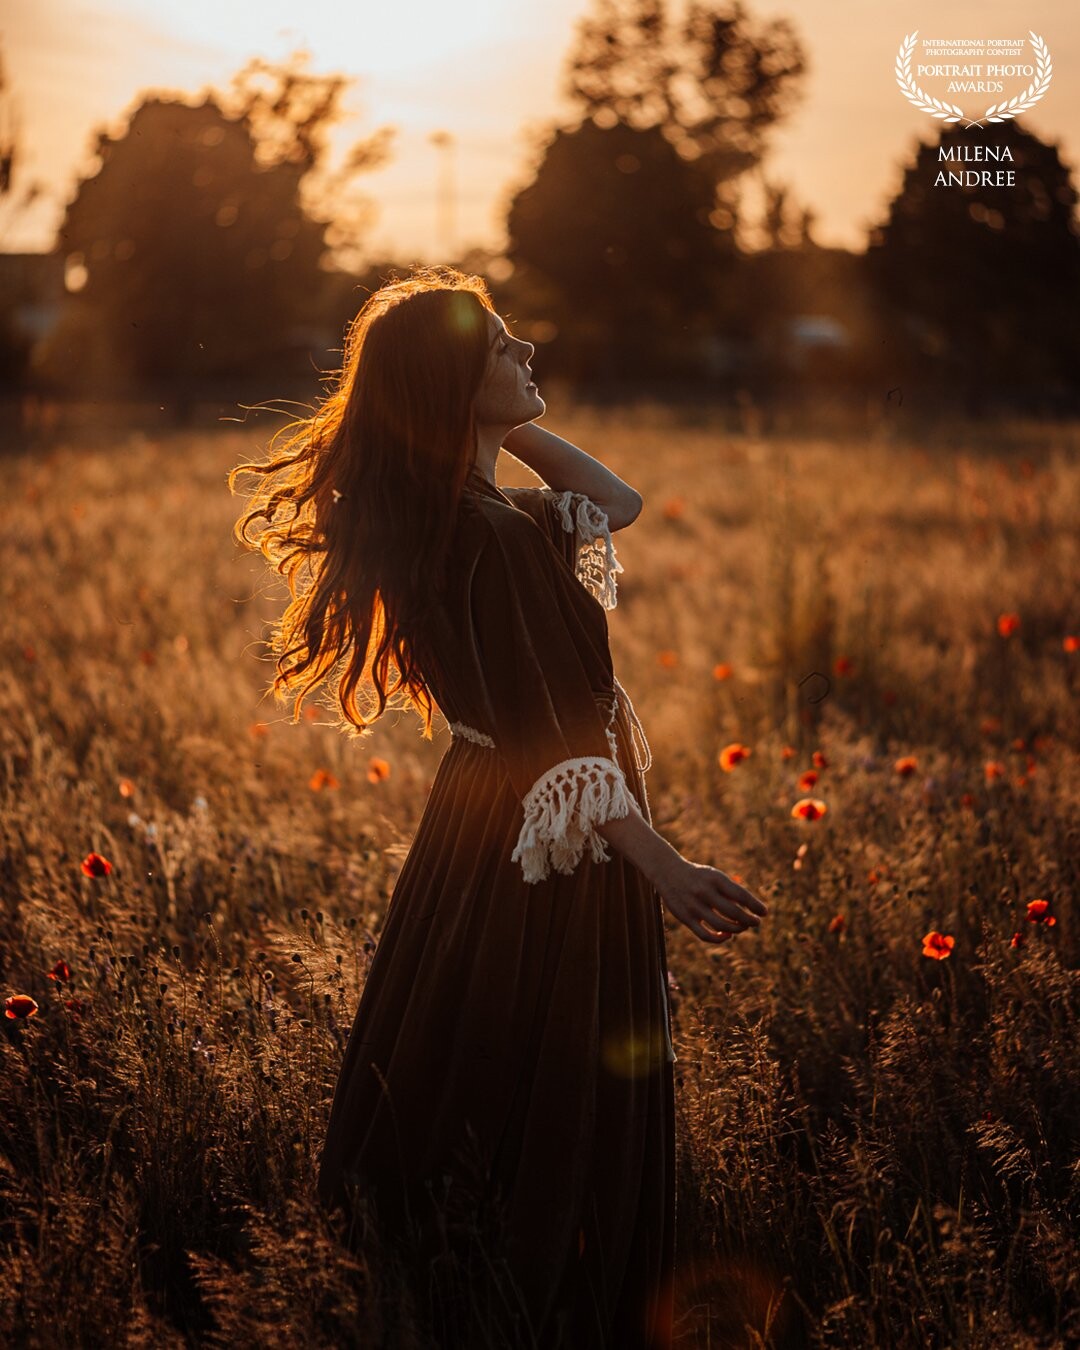 "If the sun sets today, it will also rise again tomorrow - in beauty and infinity!"<br />
<br />
Model: @model.ginger.woods<br />
Photo&Edit: @photogravity_milenaart